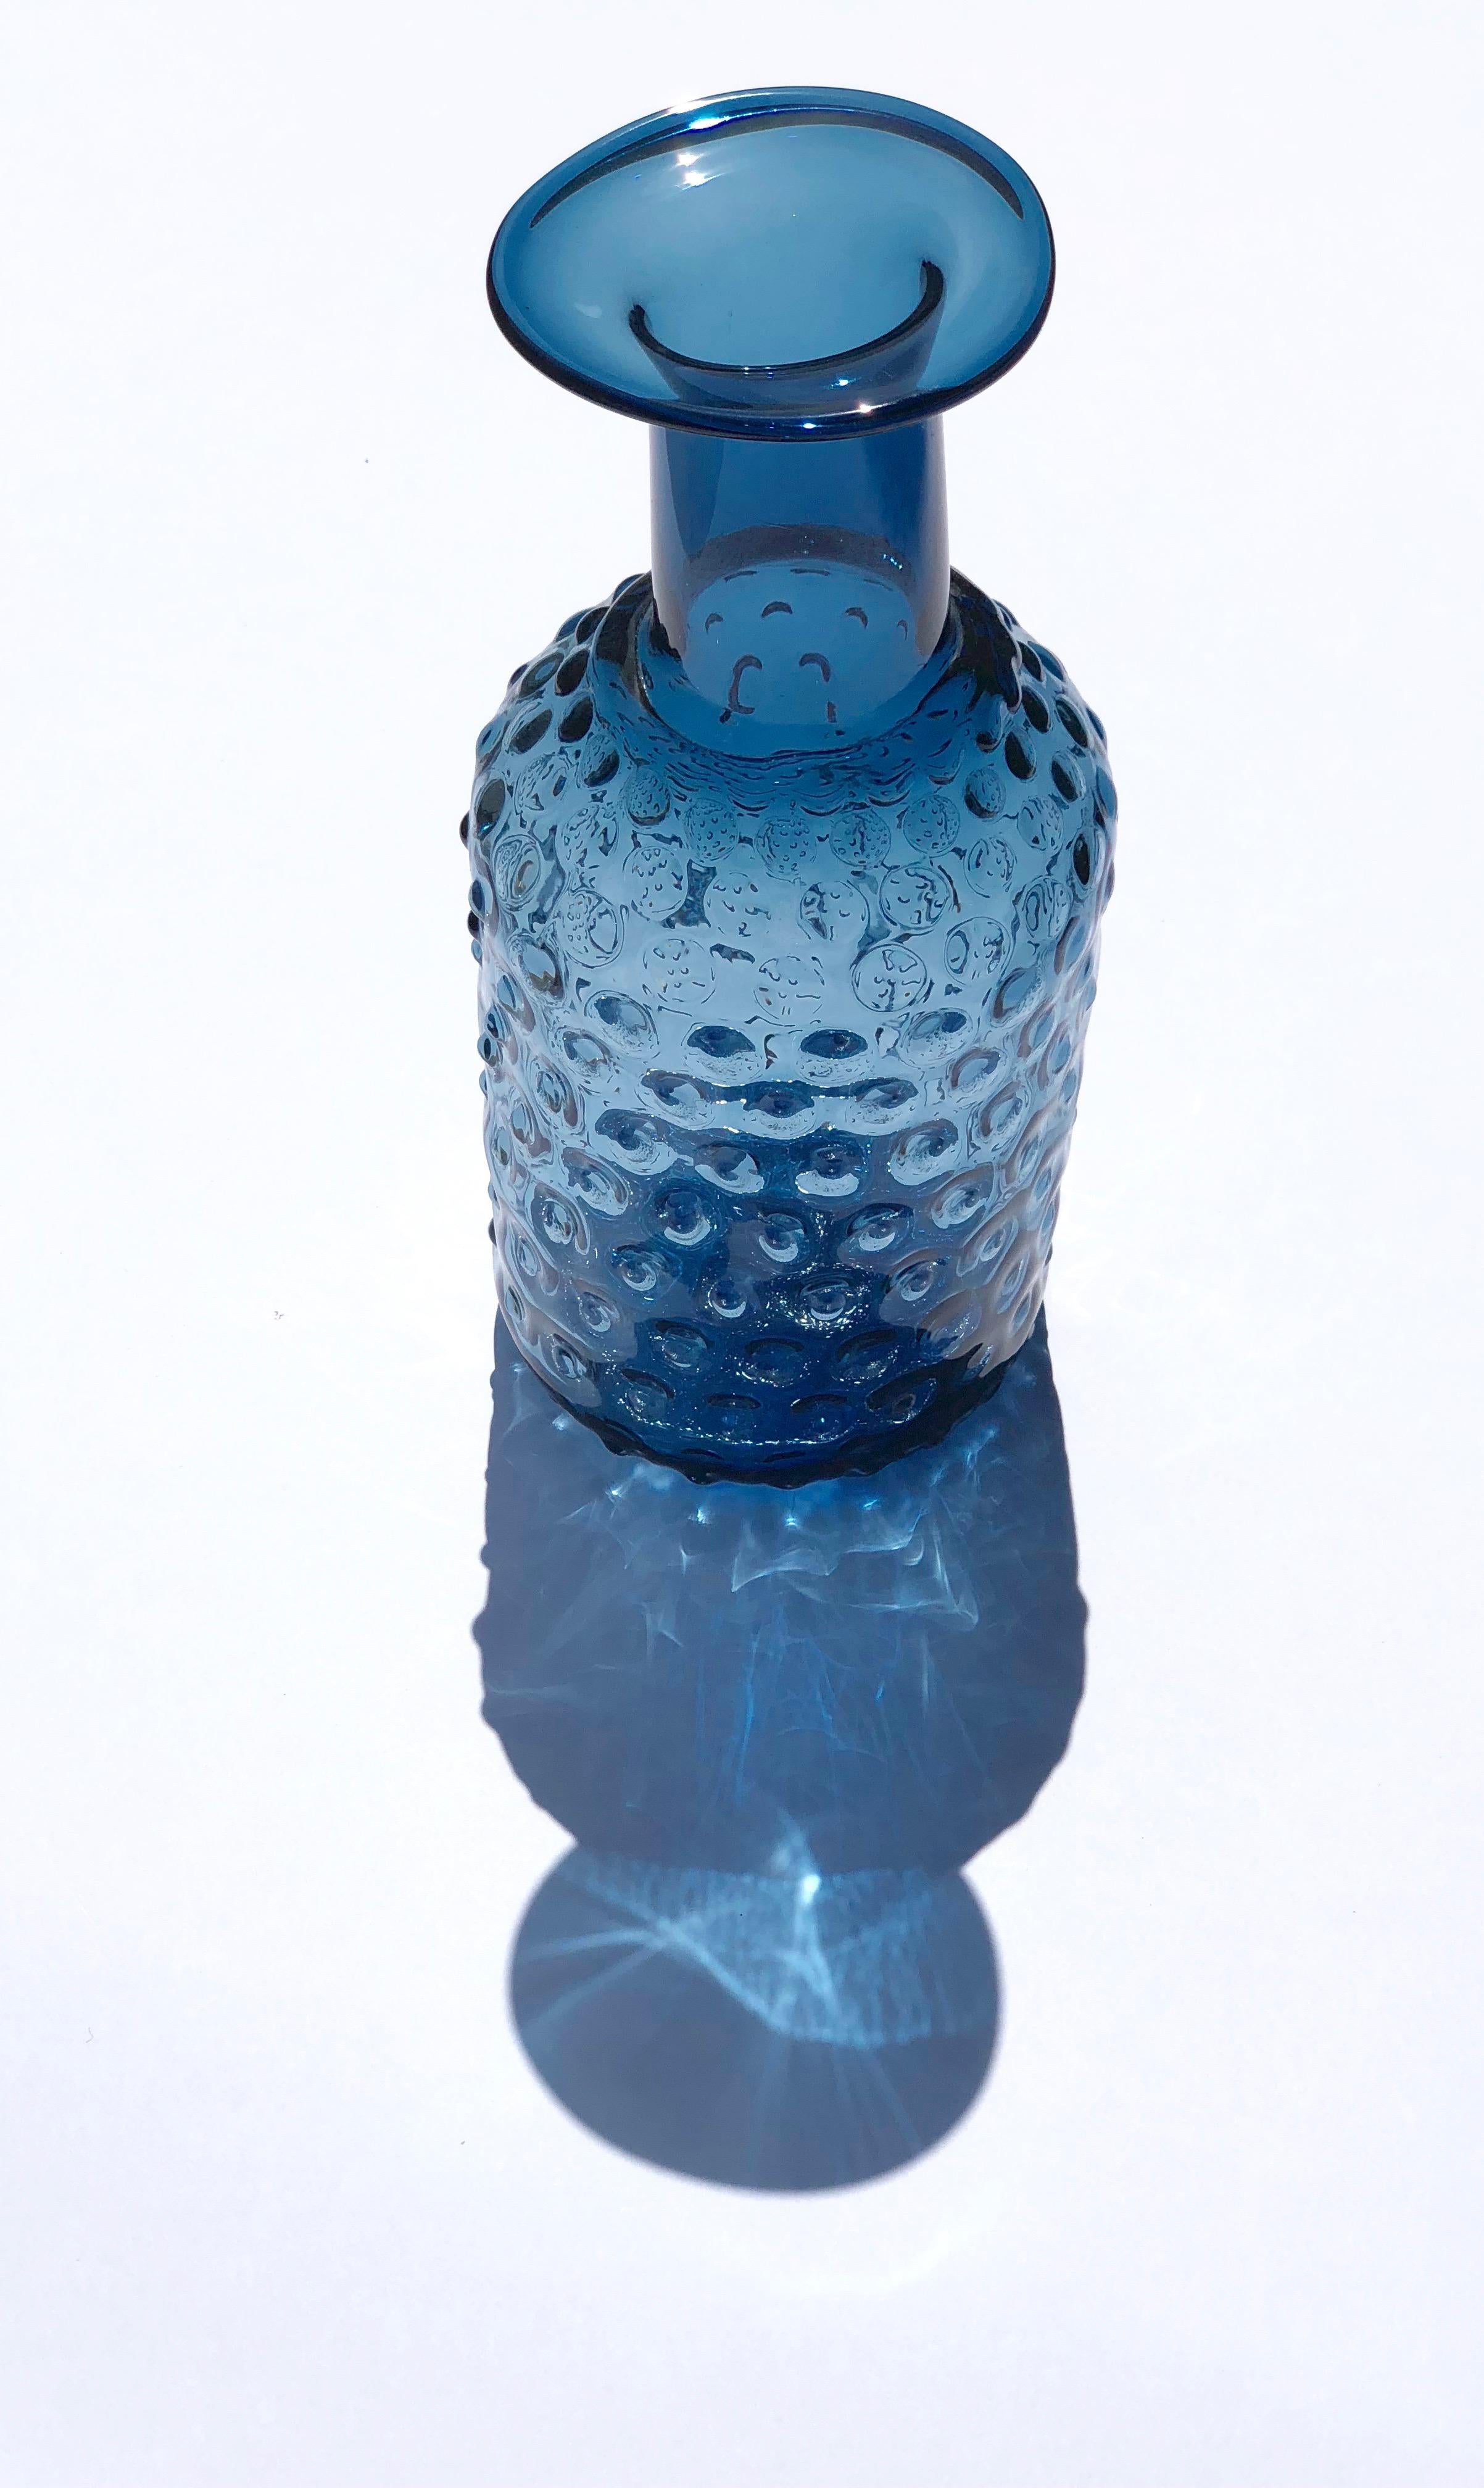 Contemporary Czech studio glass vase or bottle with bumpy facade. The bumps are actually like small optical elements that when viewed up close, you can see an optical illusion that each bump is full of bumps. The form is playfully gestalt end